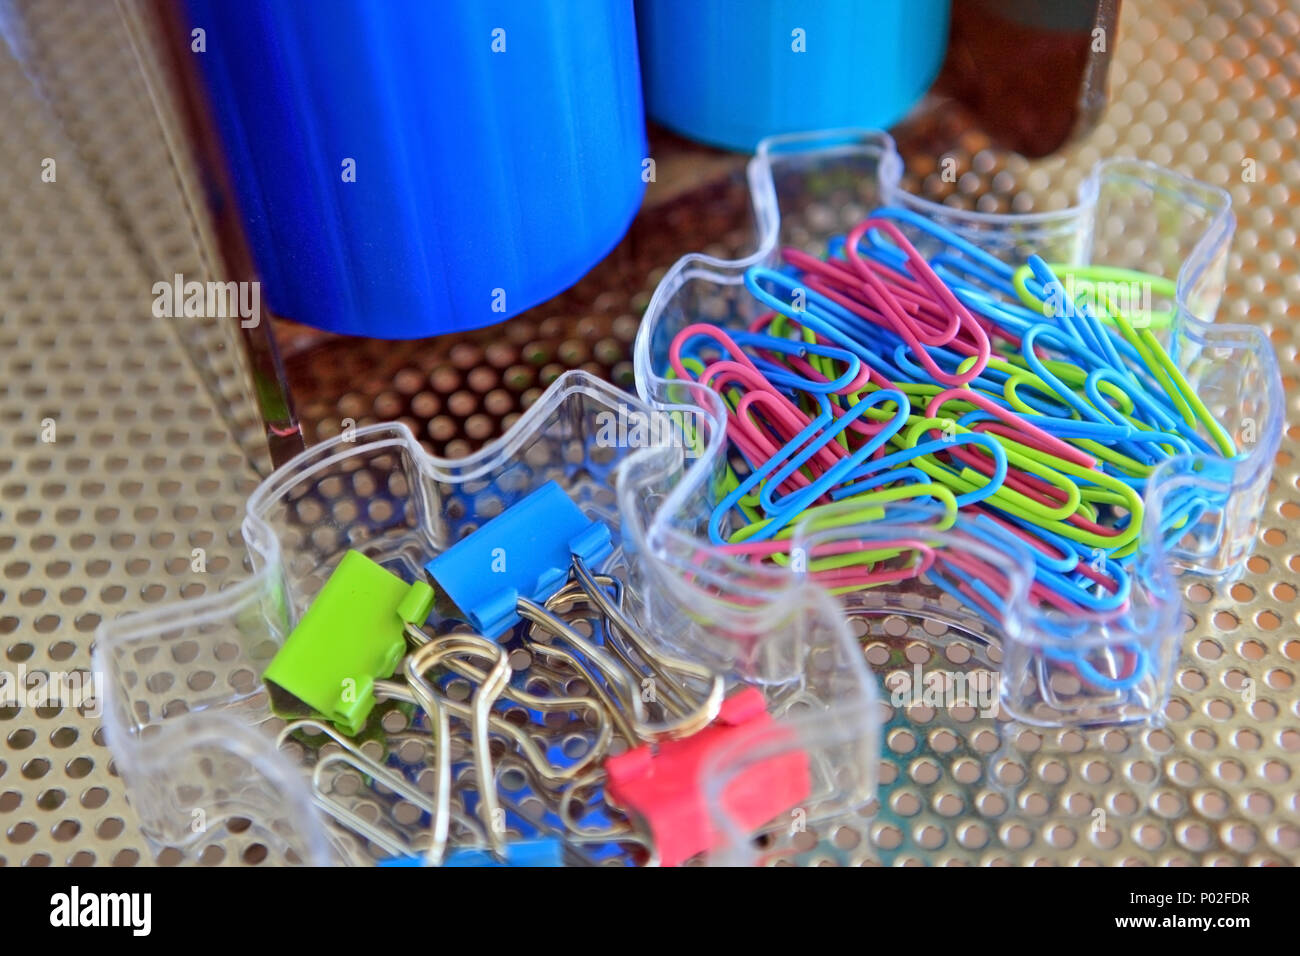 Paper clips and bulldog clips in plastic trays in a home office Stock Photo